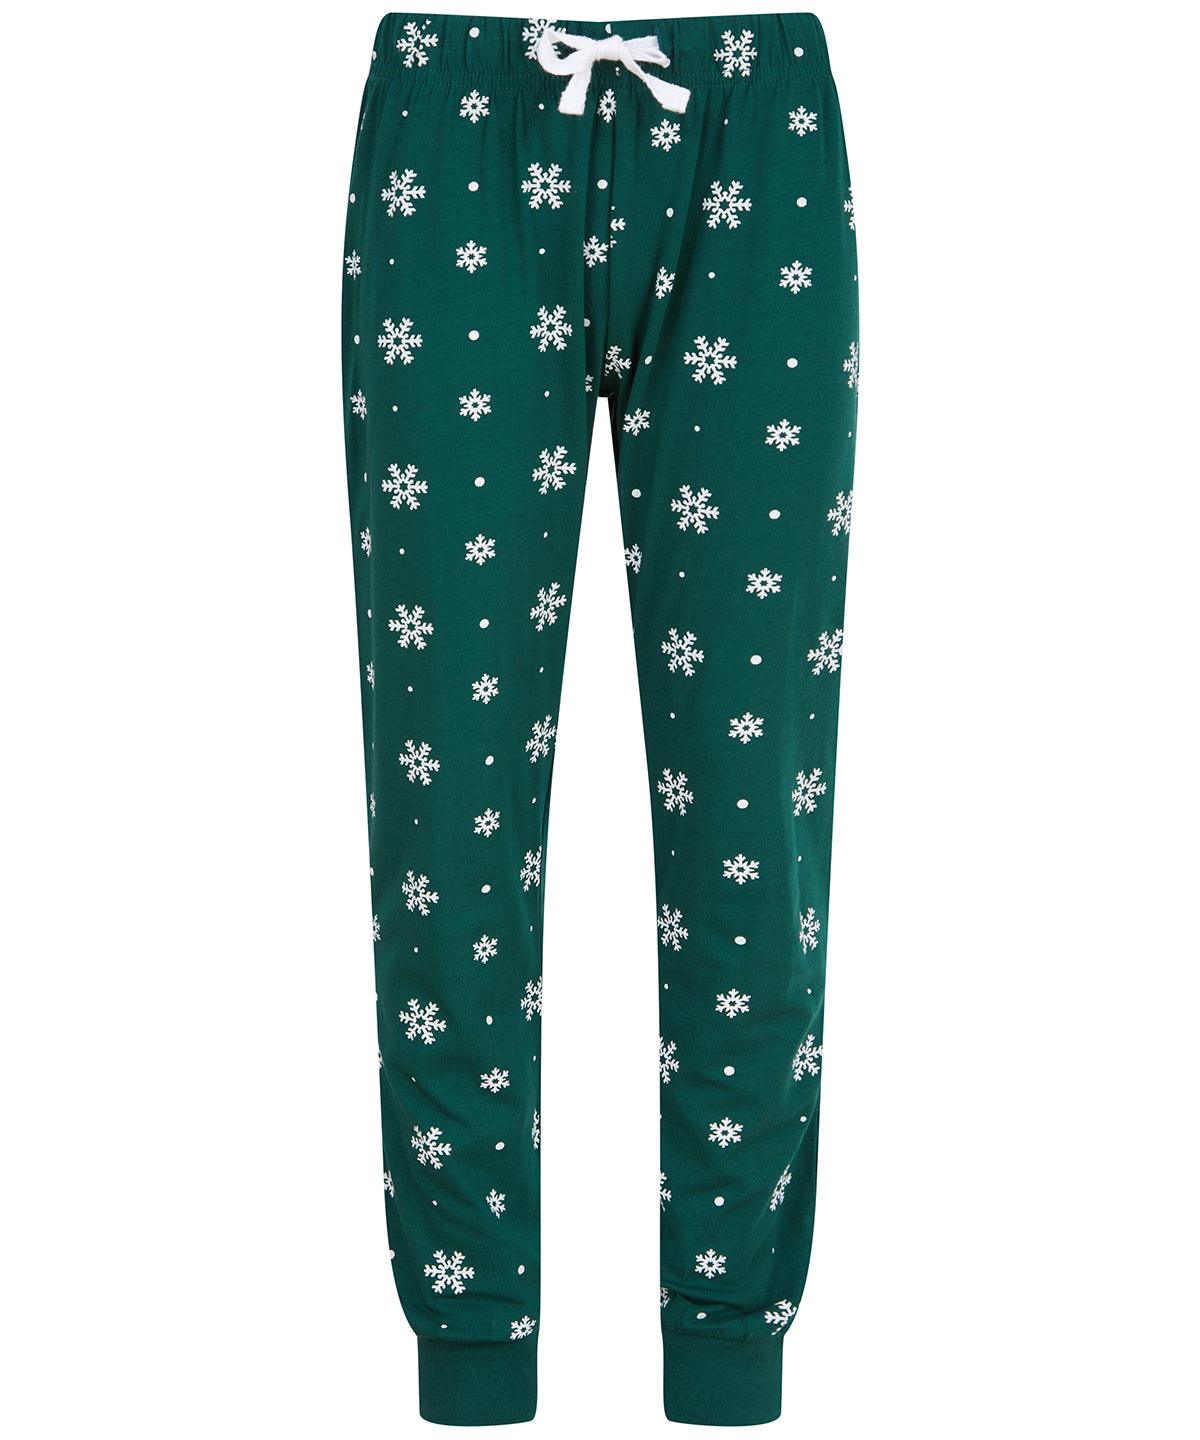 Bottle/White Snowflakes - Kids cuffed lounge pants Loungewear Bottoms SF Minni Home Comforts, Junior, Lounge & Underwear, Lounge Sets, New For 2021, New Styles For 2021 Schoolwear Centres